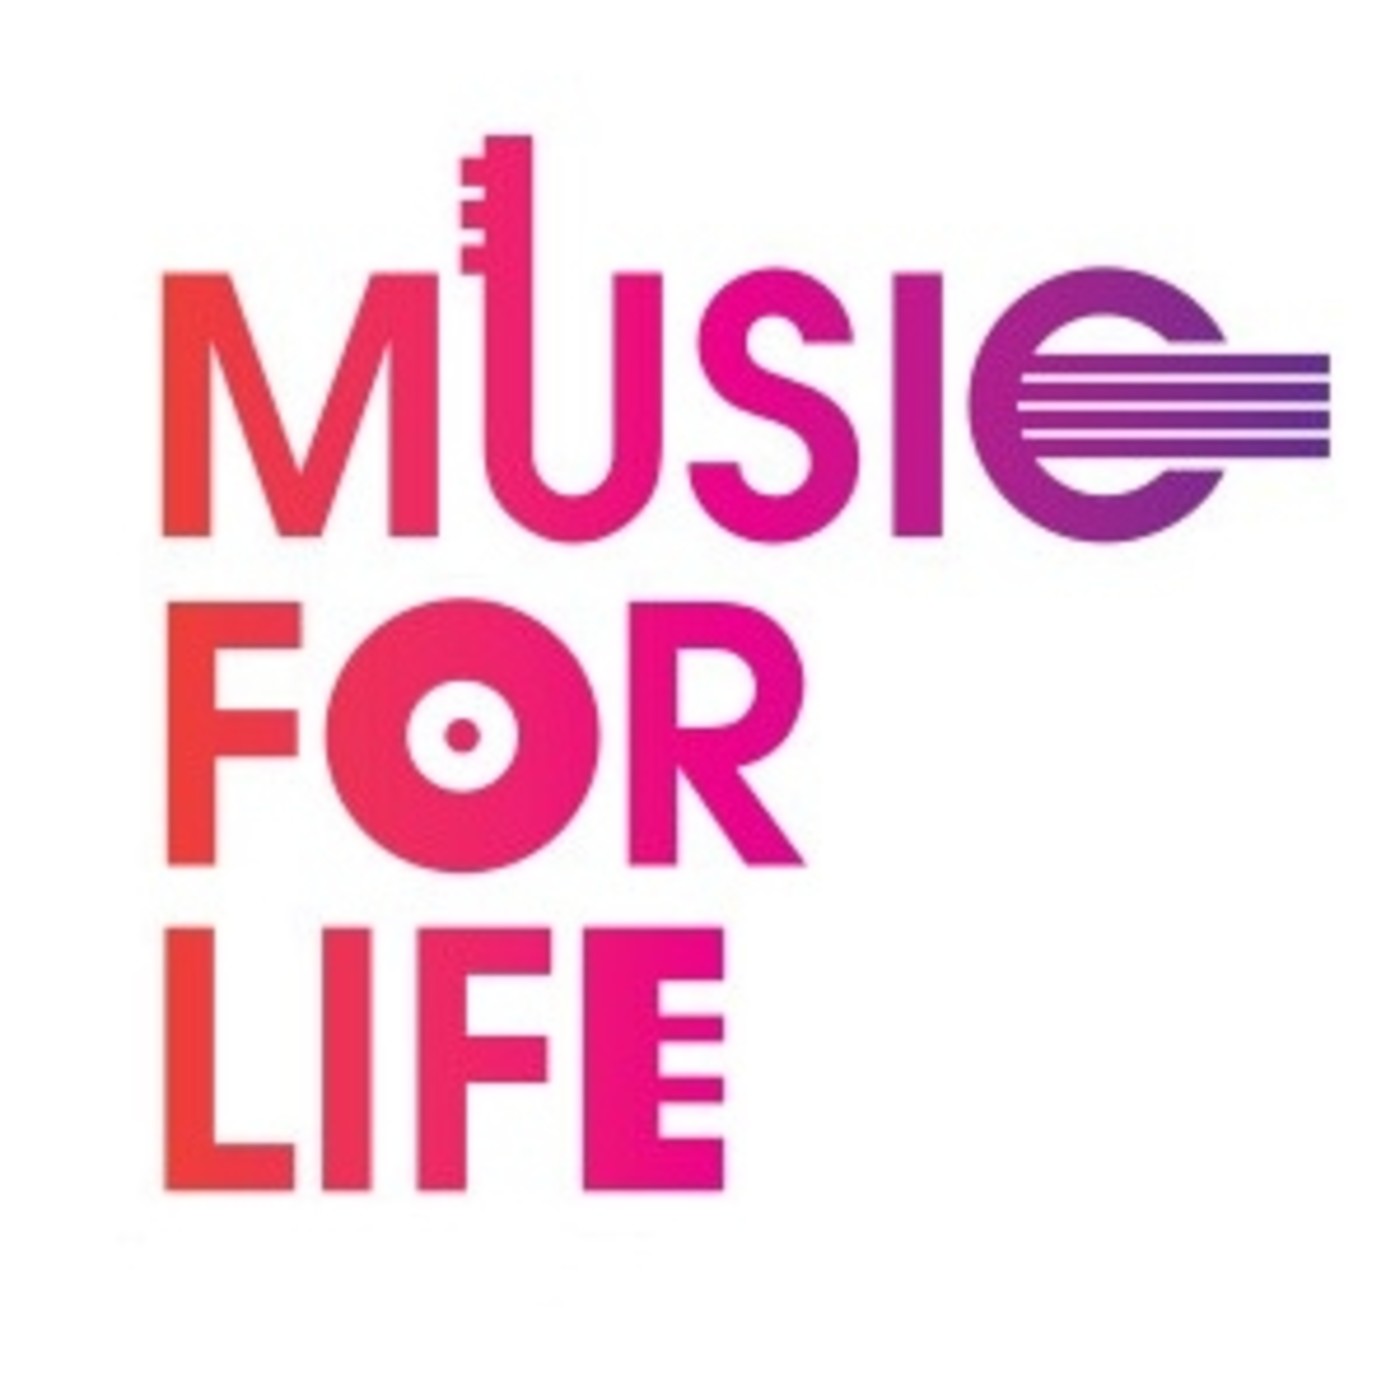 MUSIC FOR LIFE by CARLOS ORTIZ